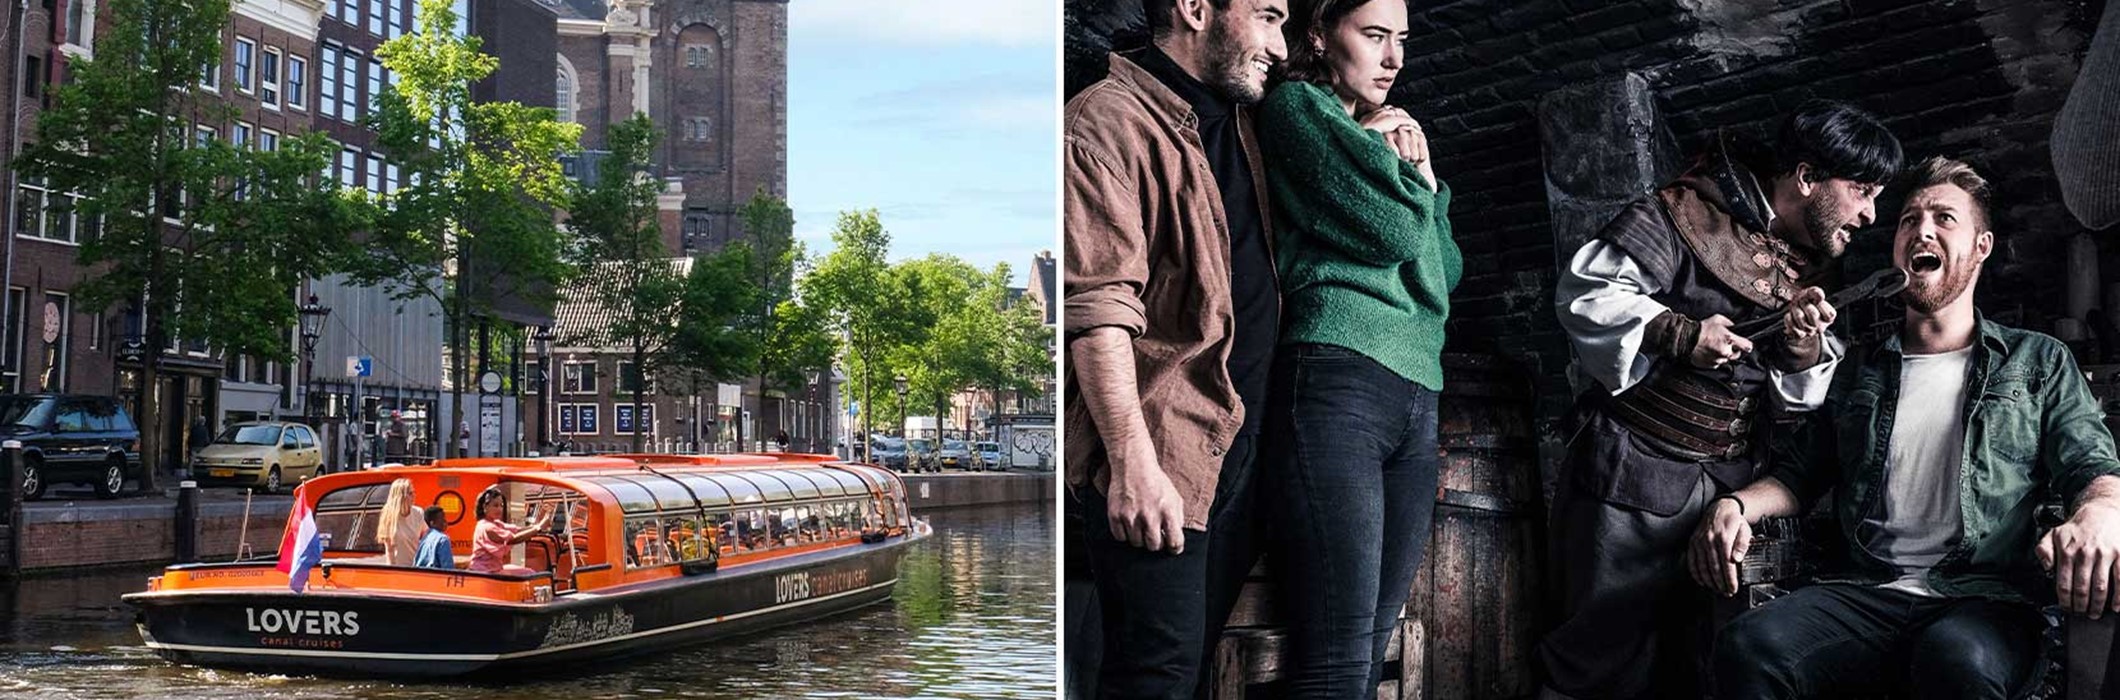 The Amsterdam Dungeon + Amsterdam Canal Cruise